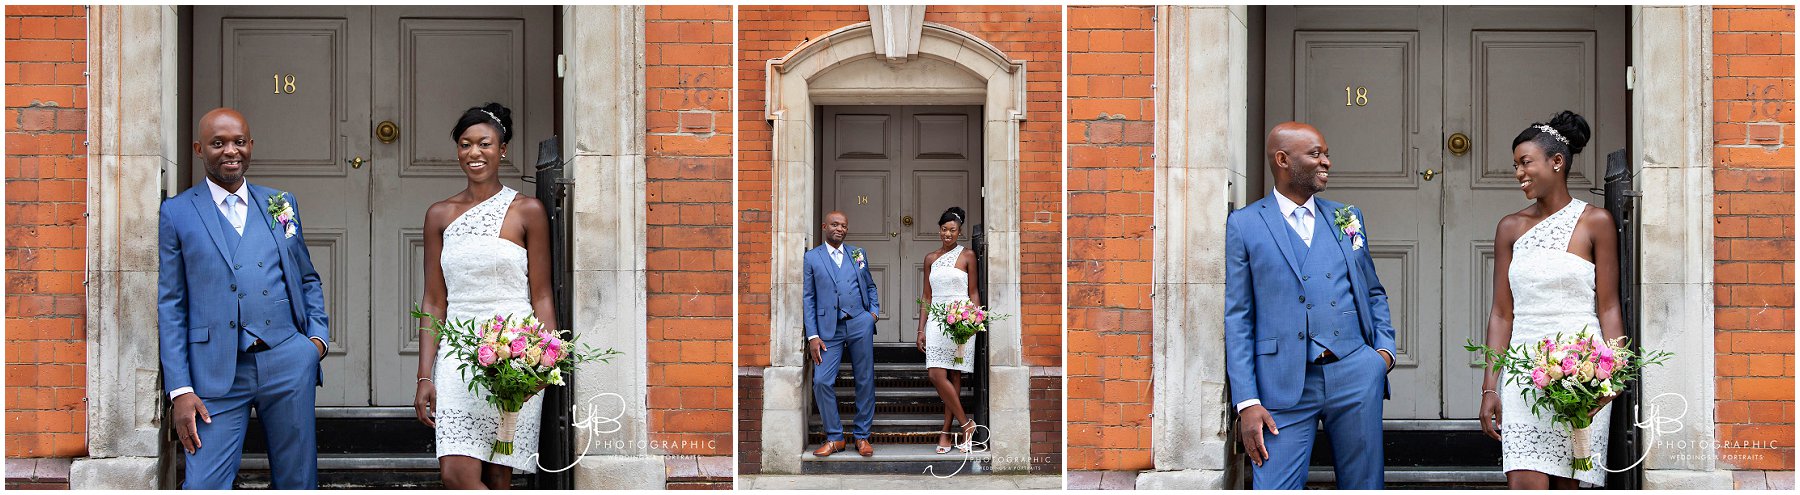 The bride and groom utilise the fabulous Chelsea architecture for their wedding portraits.